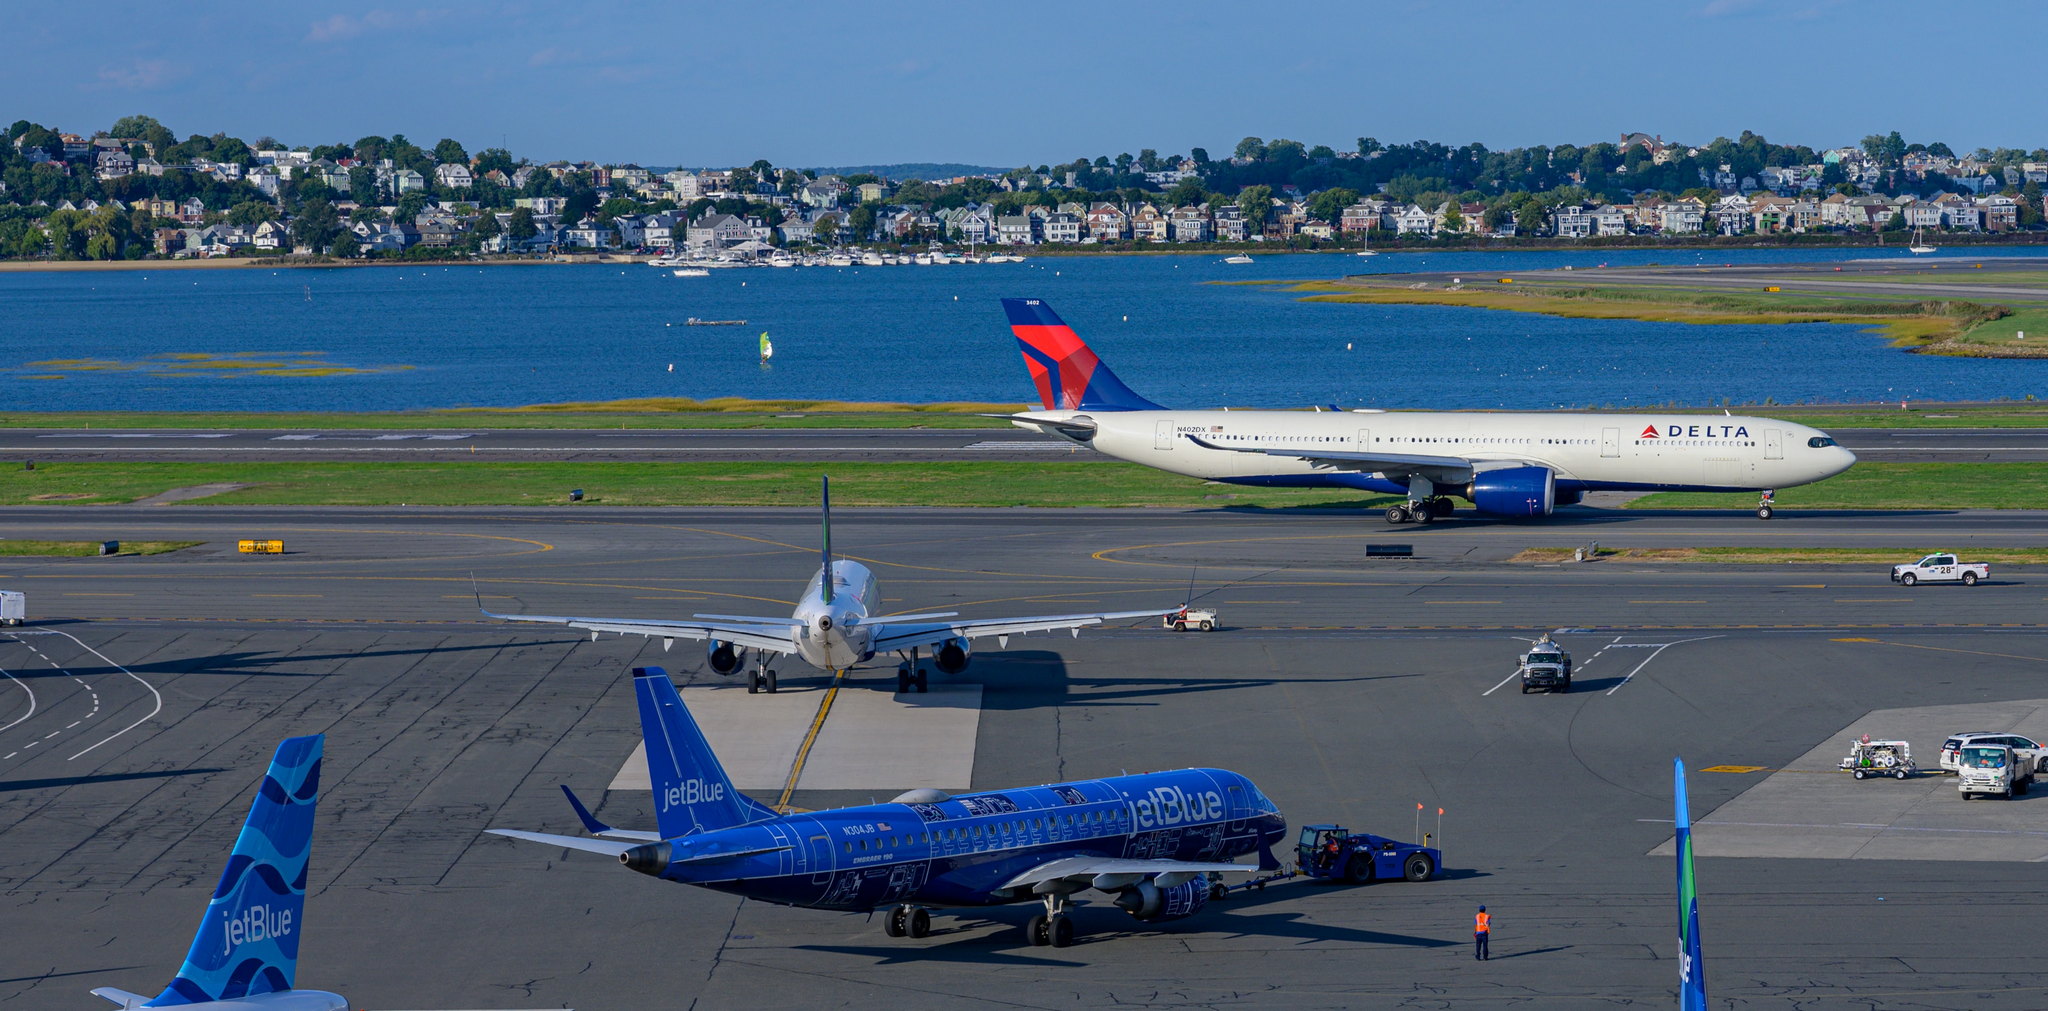 Boston Taxiways with planes